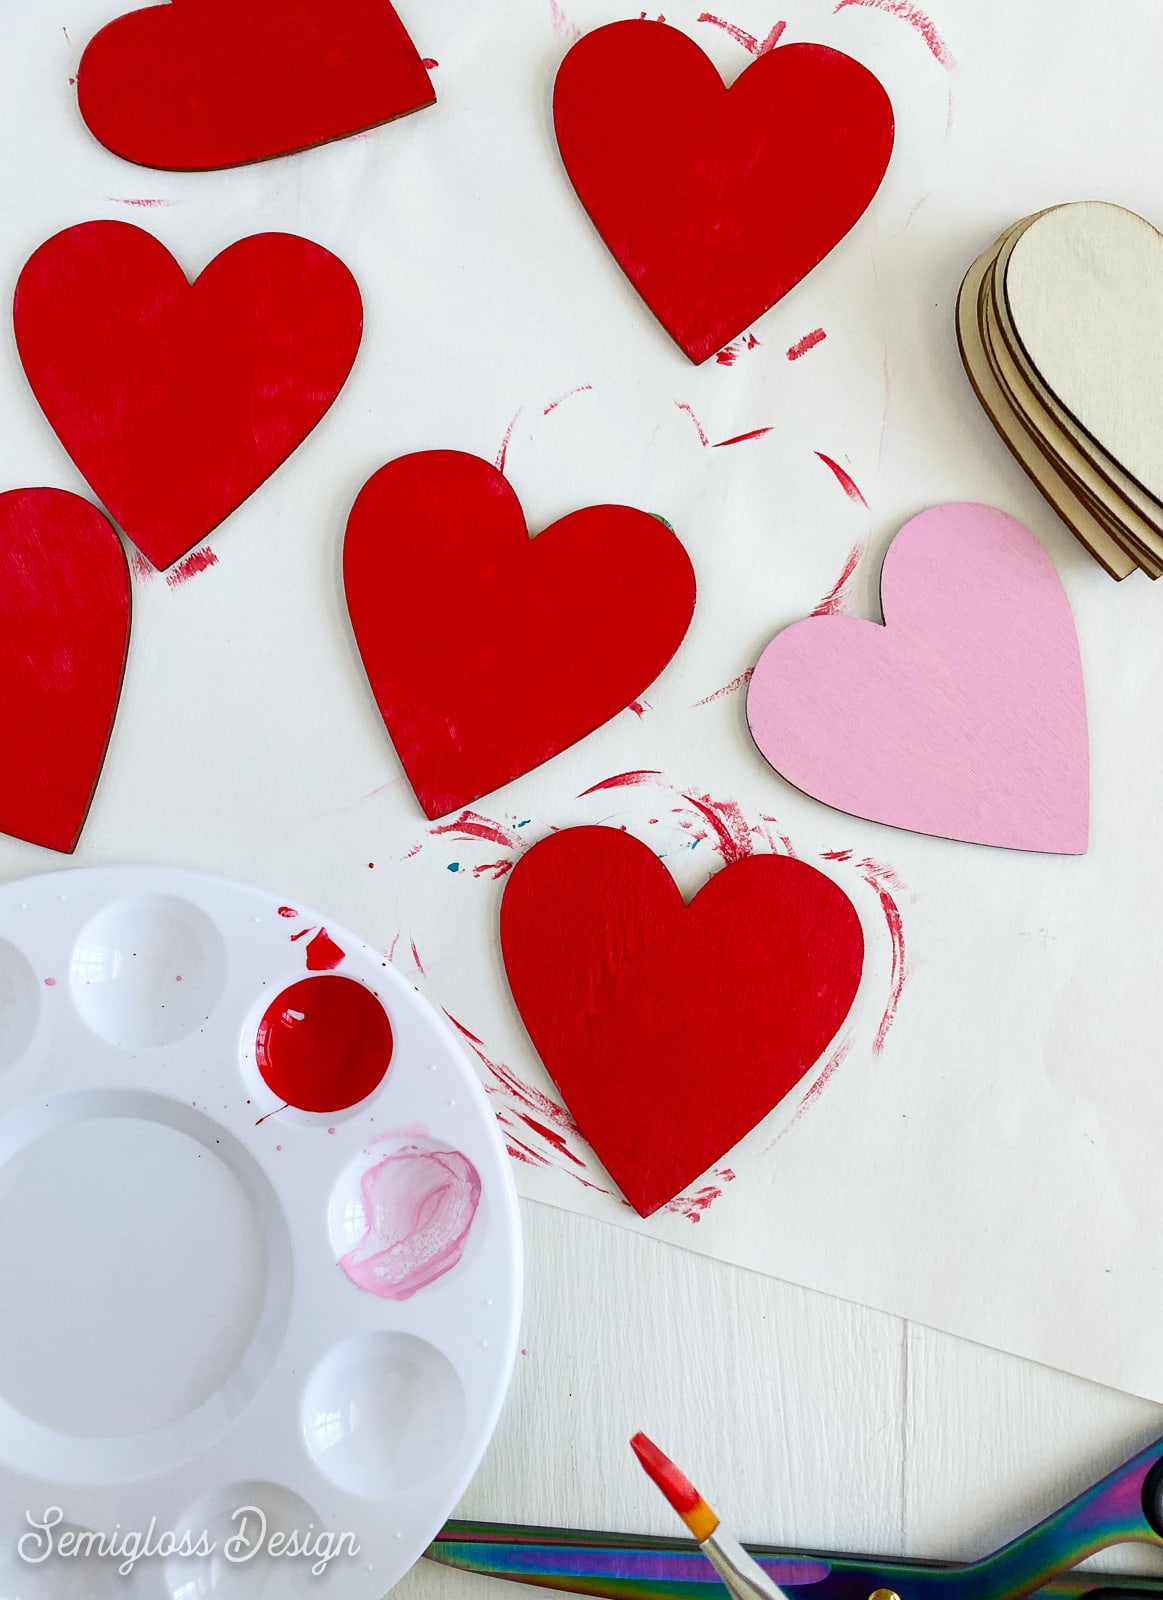 painting wooden hearts red, pink, and white